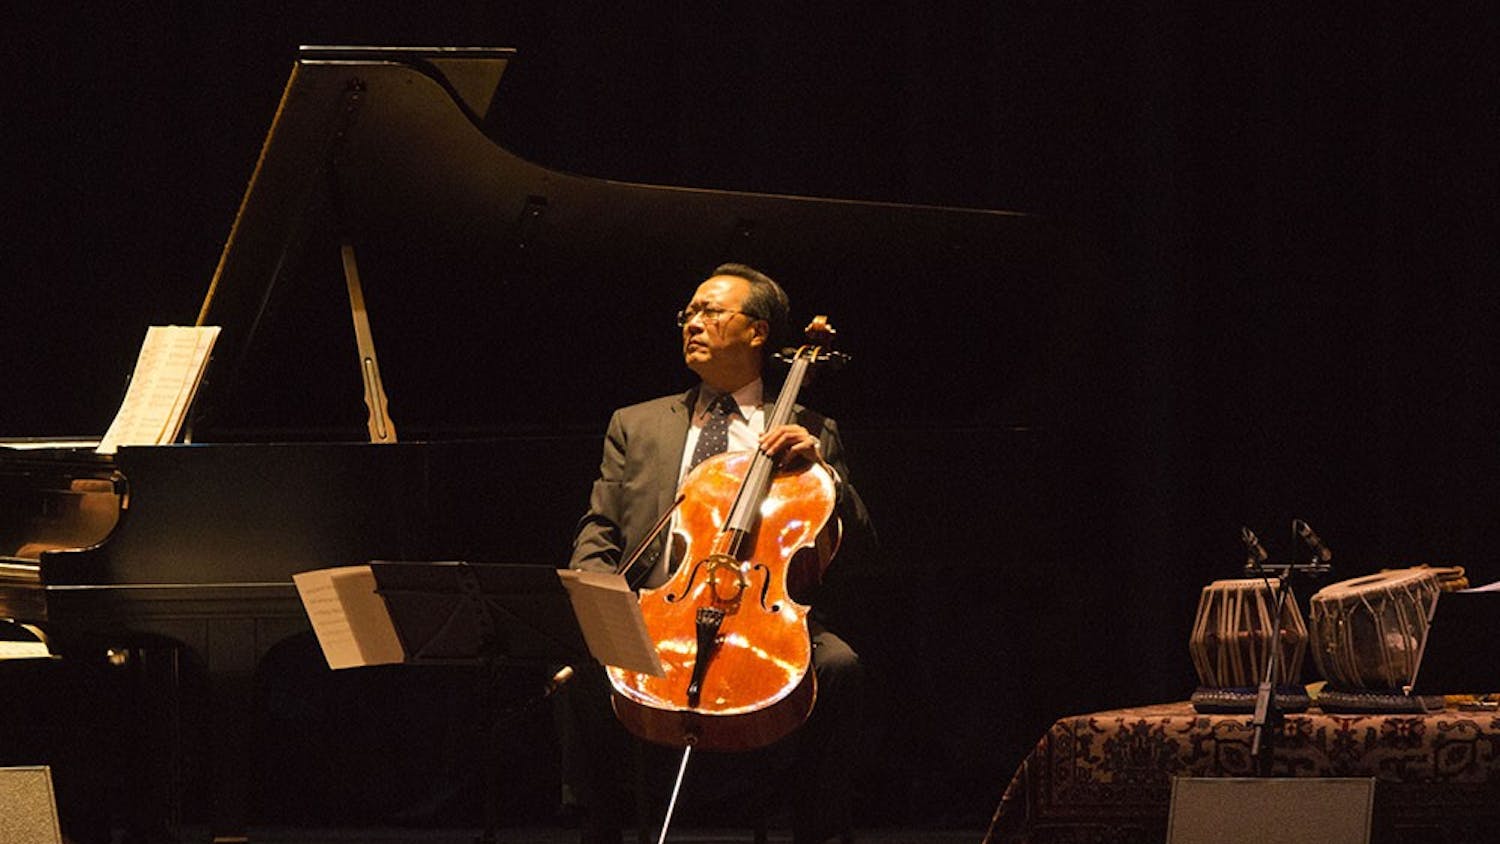 World famous cellist, Yo-Yo Ma, performs at the IU Auditorium on Wednesday evening. Ma has produced over 90 albums of which 18 have won Grammy awards.